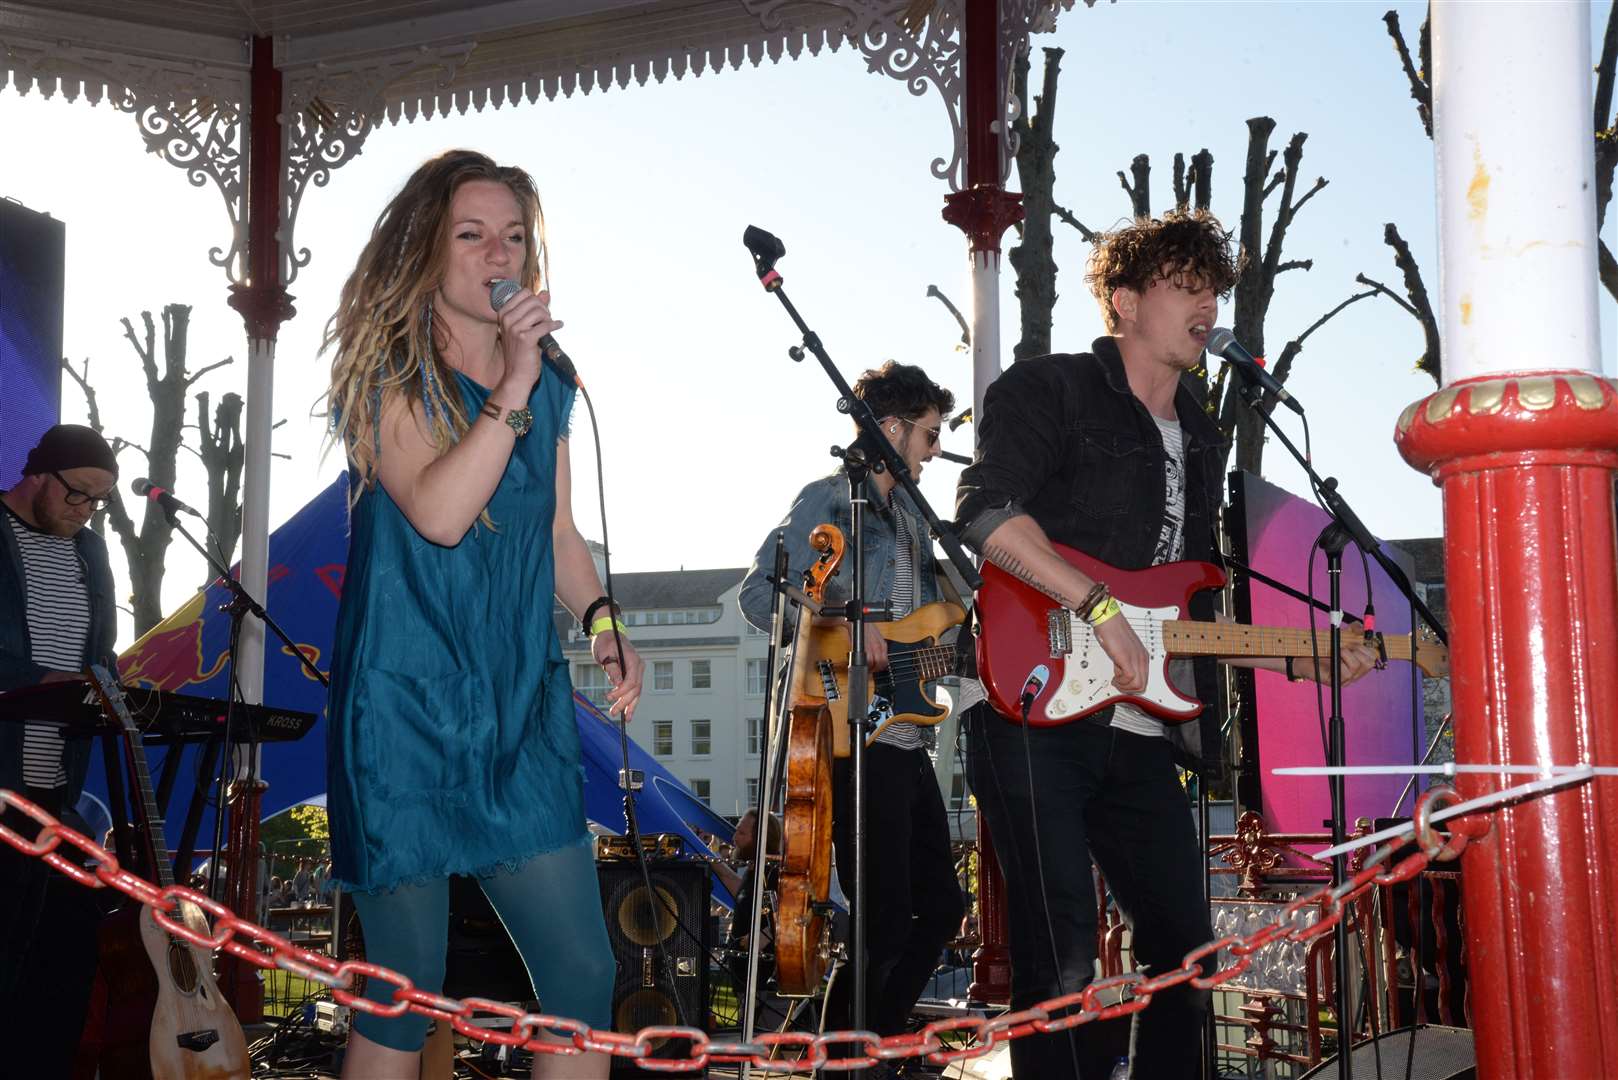 Coco and the Butterfields performing at the City Sound Project music festival held in the Dane John Gardens in 2018